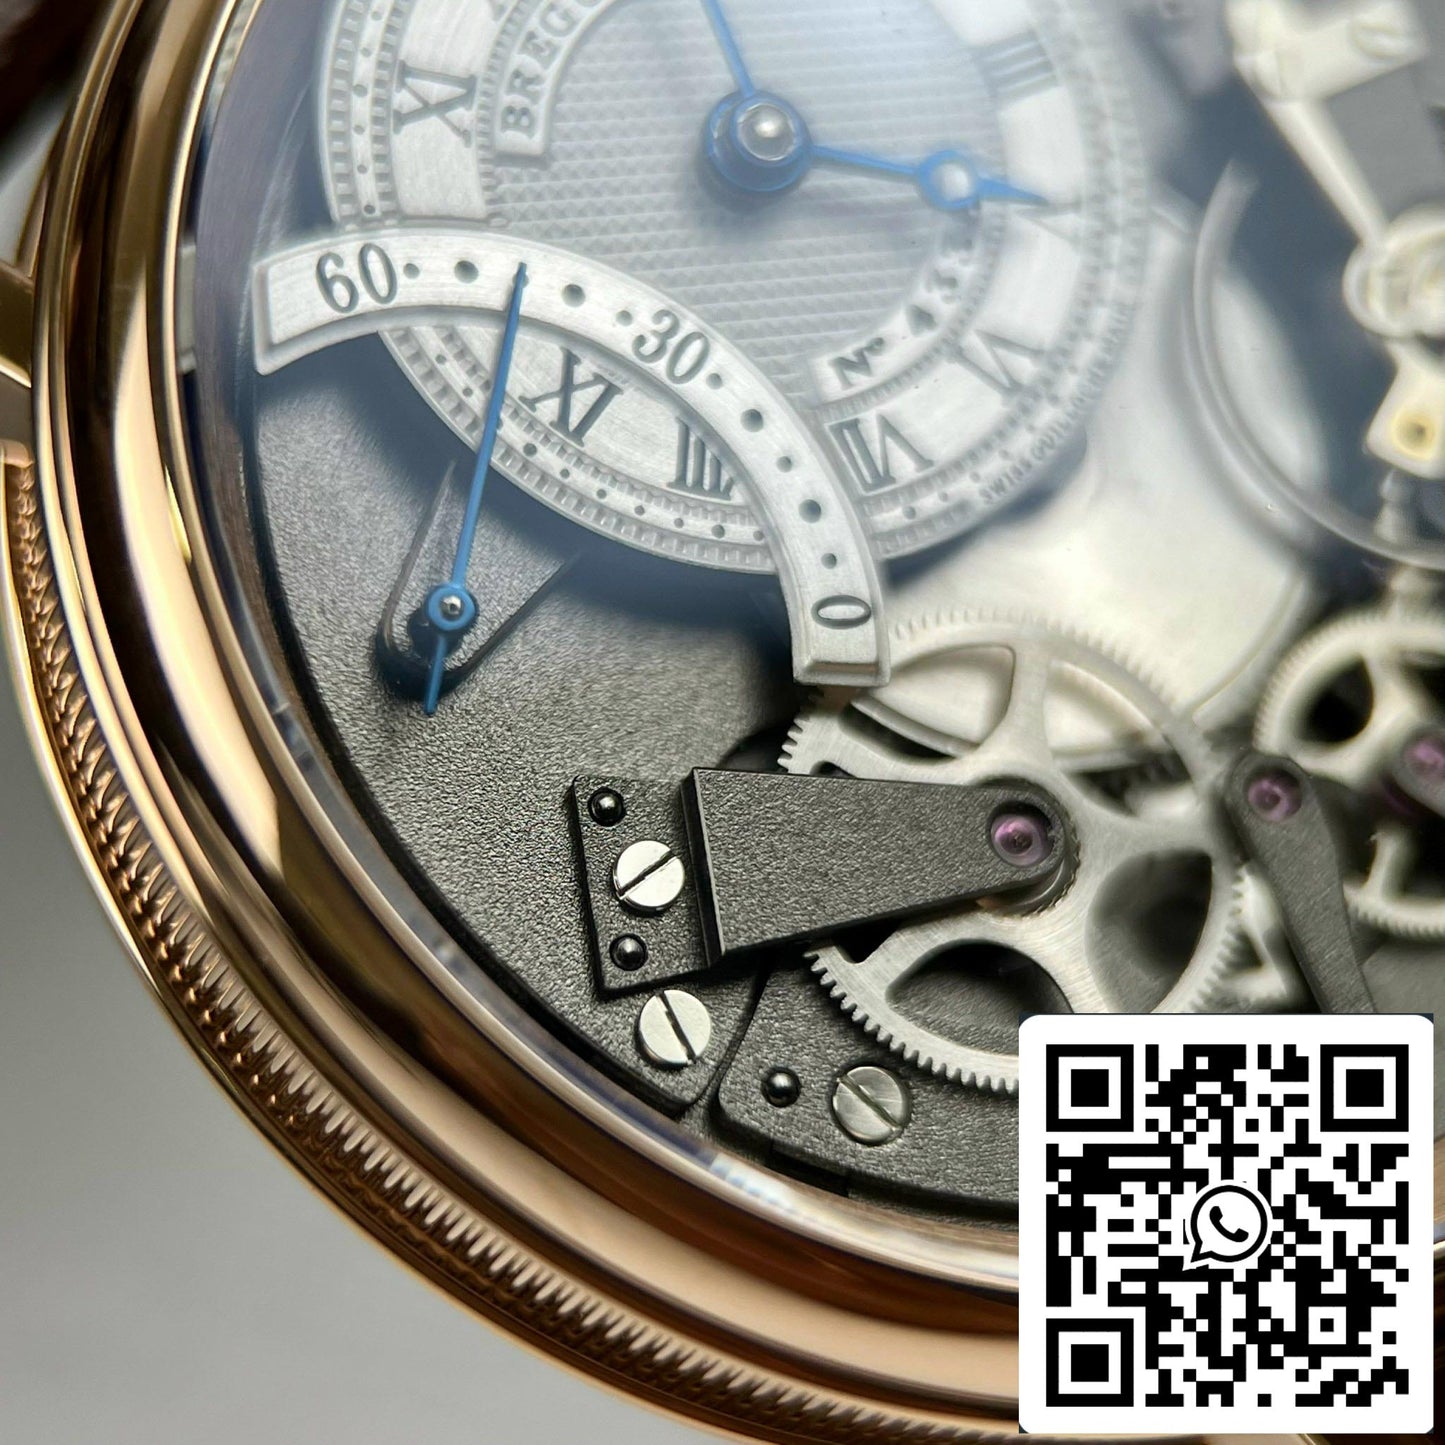 Breguet Tradition 7097BR/G1/9WU 1:1 Best Edition ZF Factory 18k Rose Gold US Replica Watch